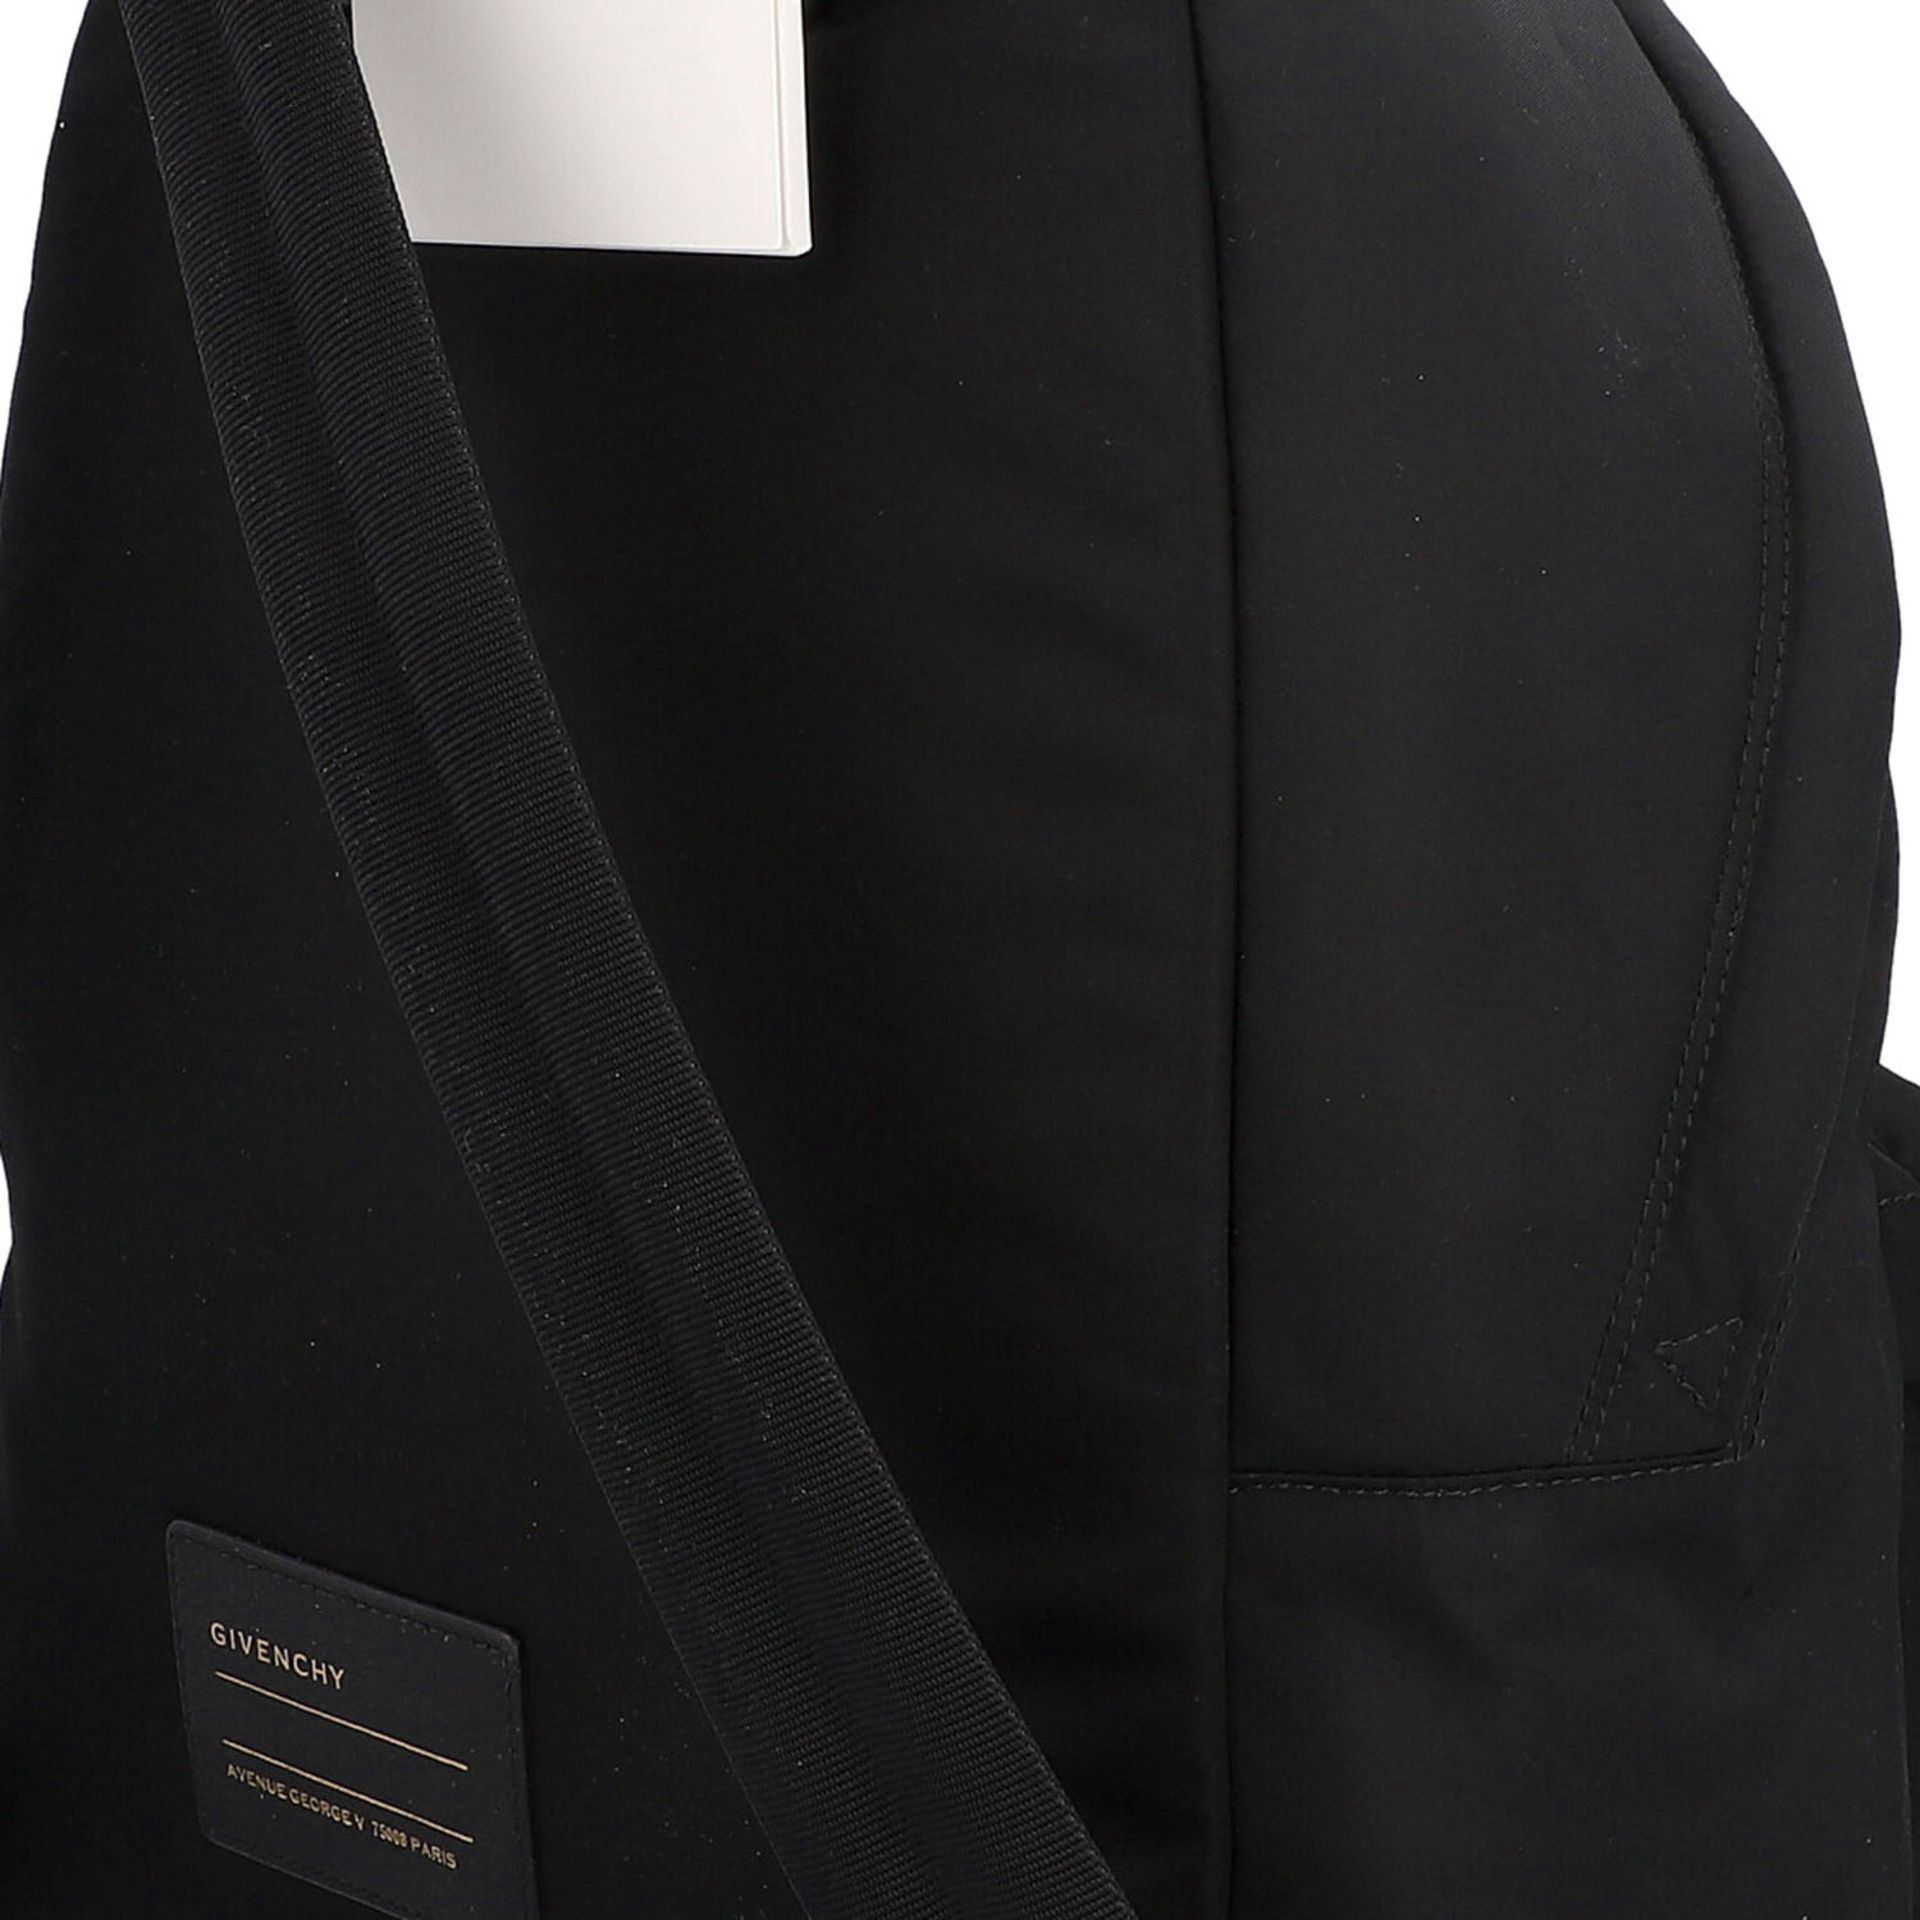 GIVENCHY Rucksack "MAD LOVE TOUR". - Image 8 of 8